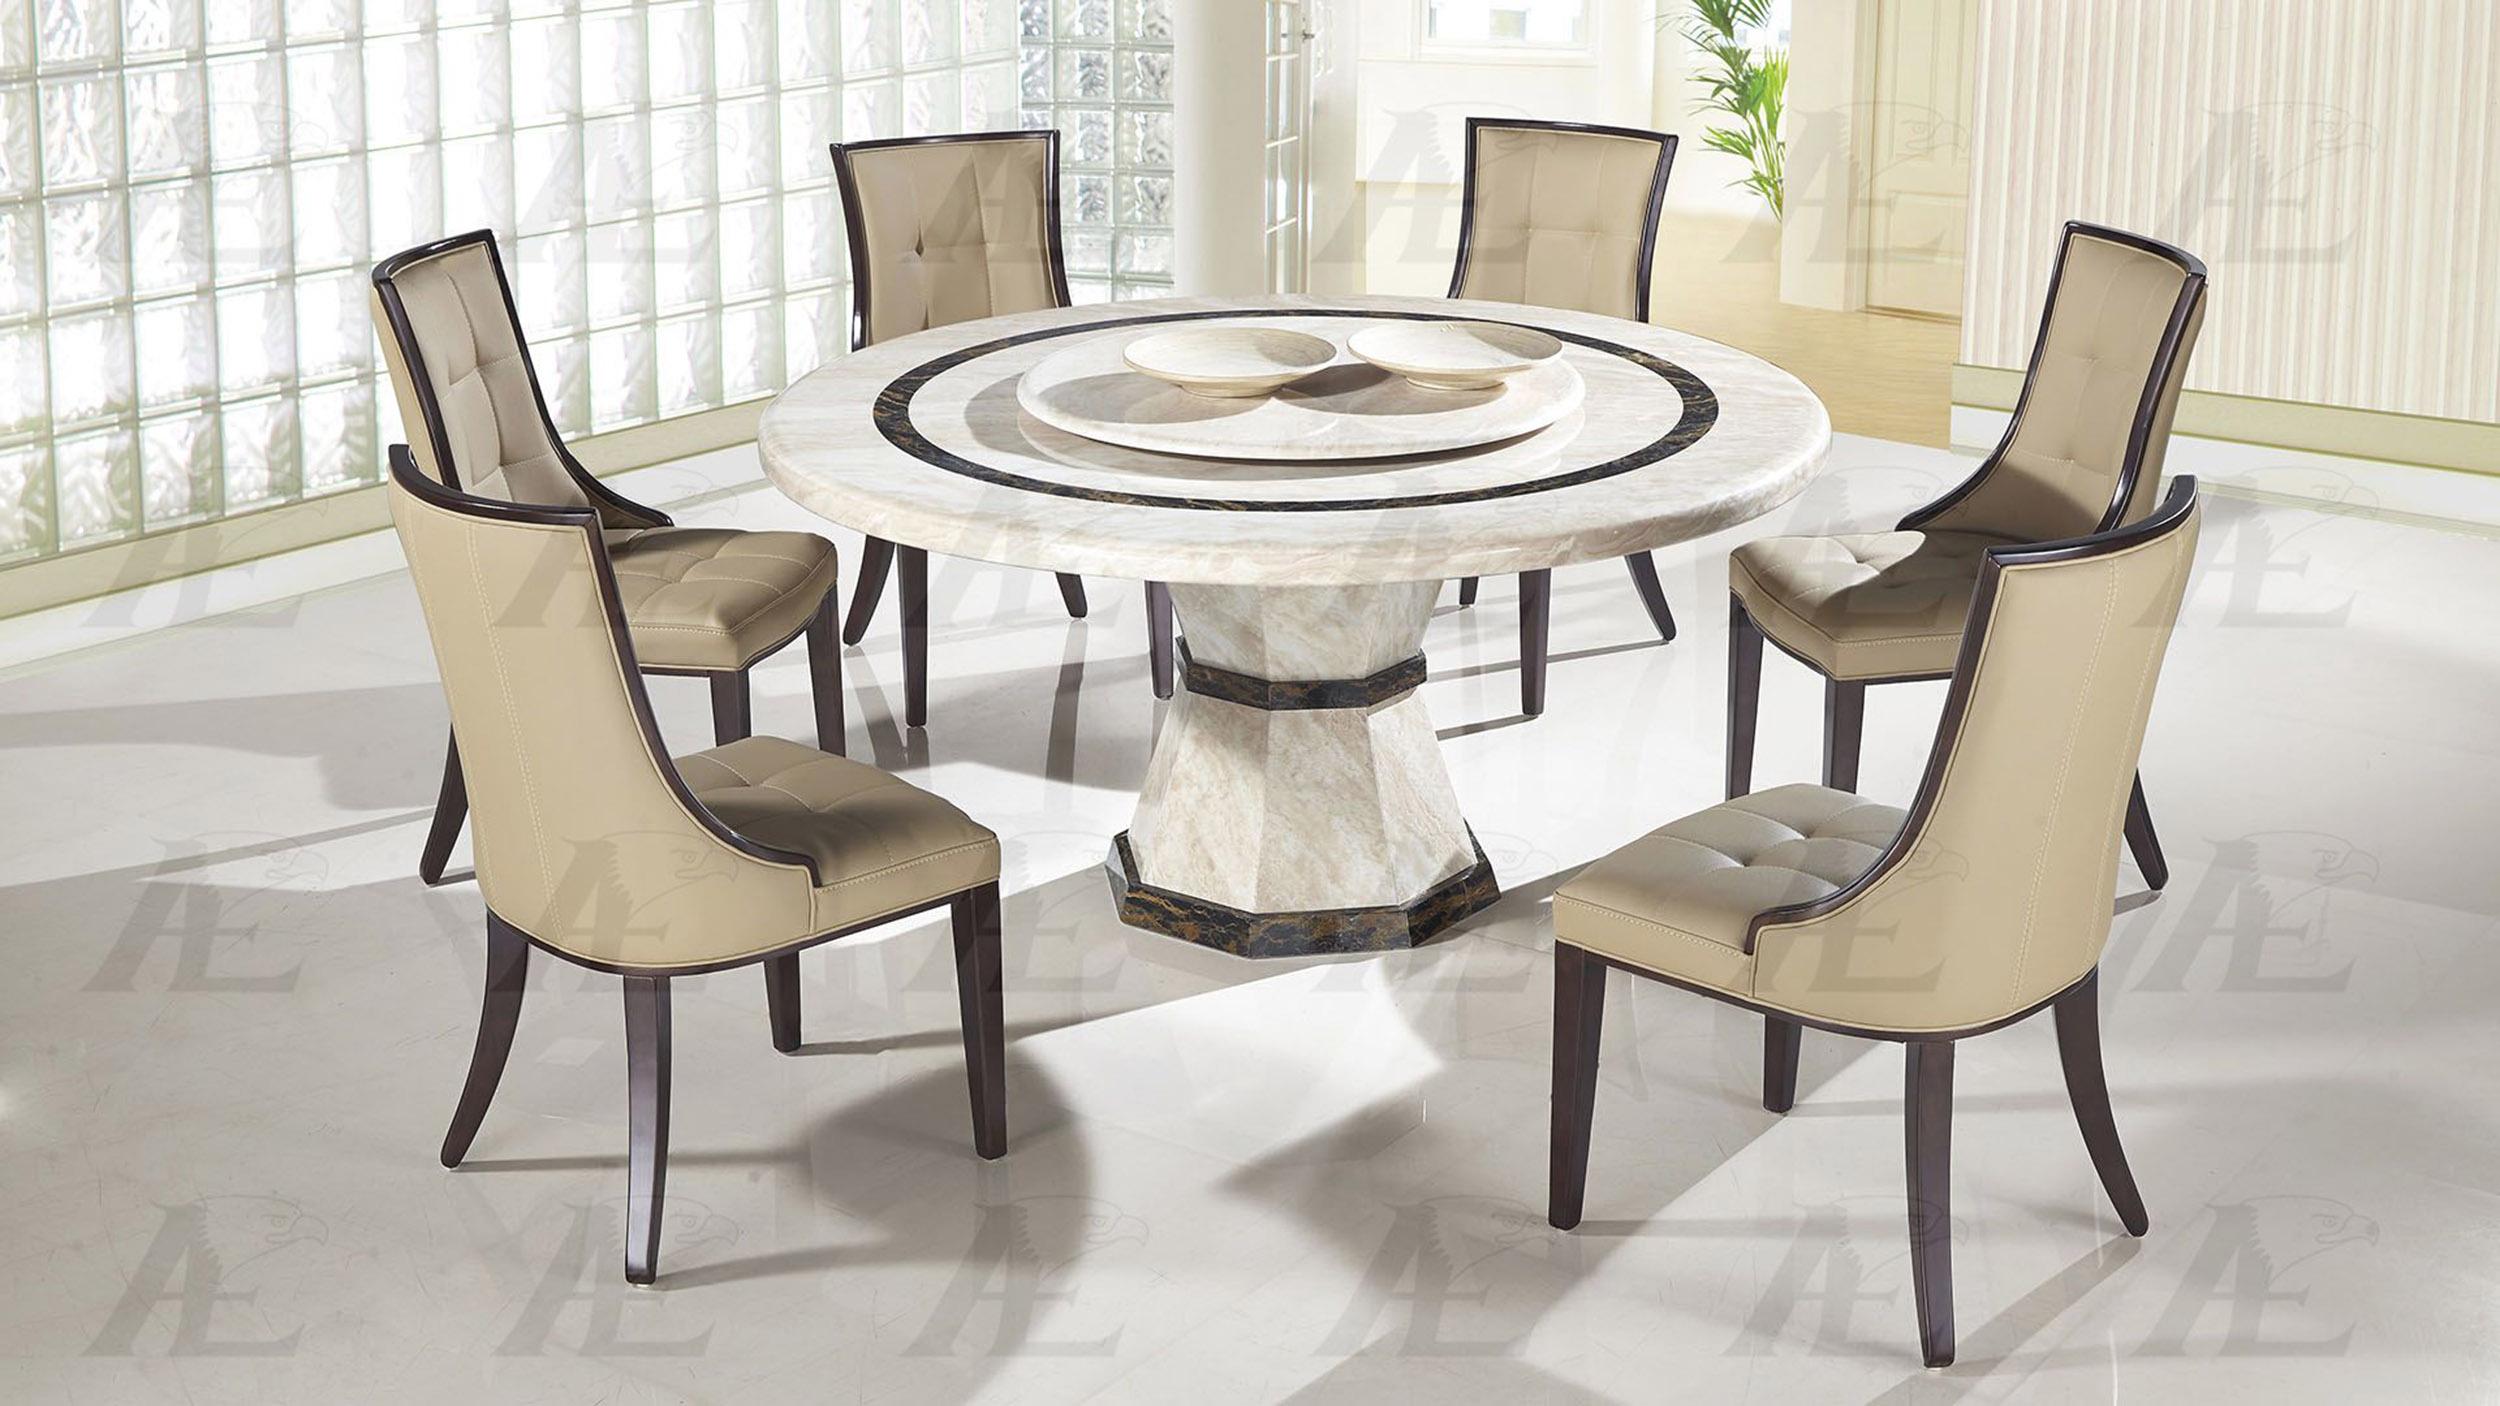 

    
Beige Faux Marble Top Round Dining Table w/ Lazy Susan American Eagle Furniture  DT-H38
